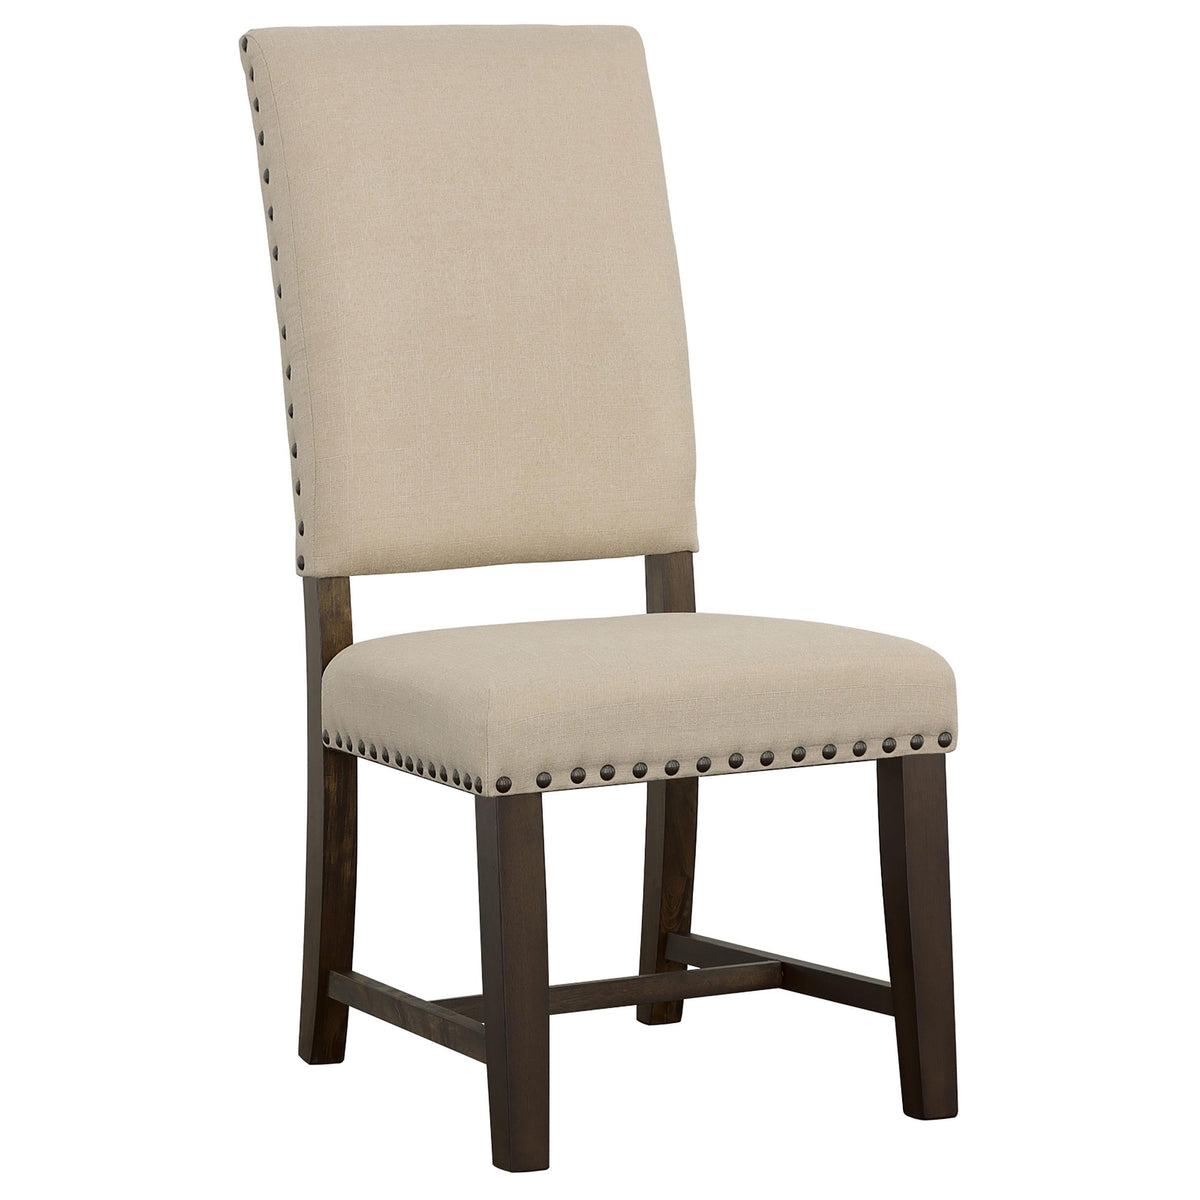 Twain Upholstered Side Chairs Beige (Set of 2)  Las Vegas Furniture Stores